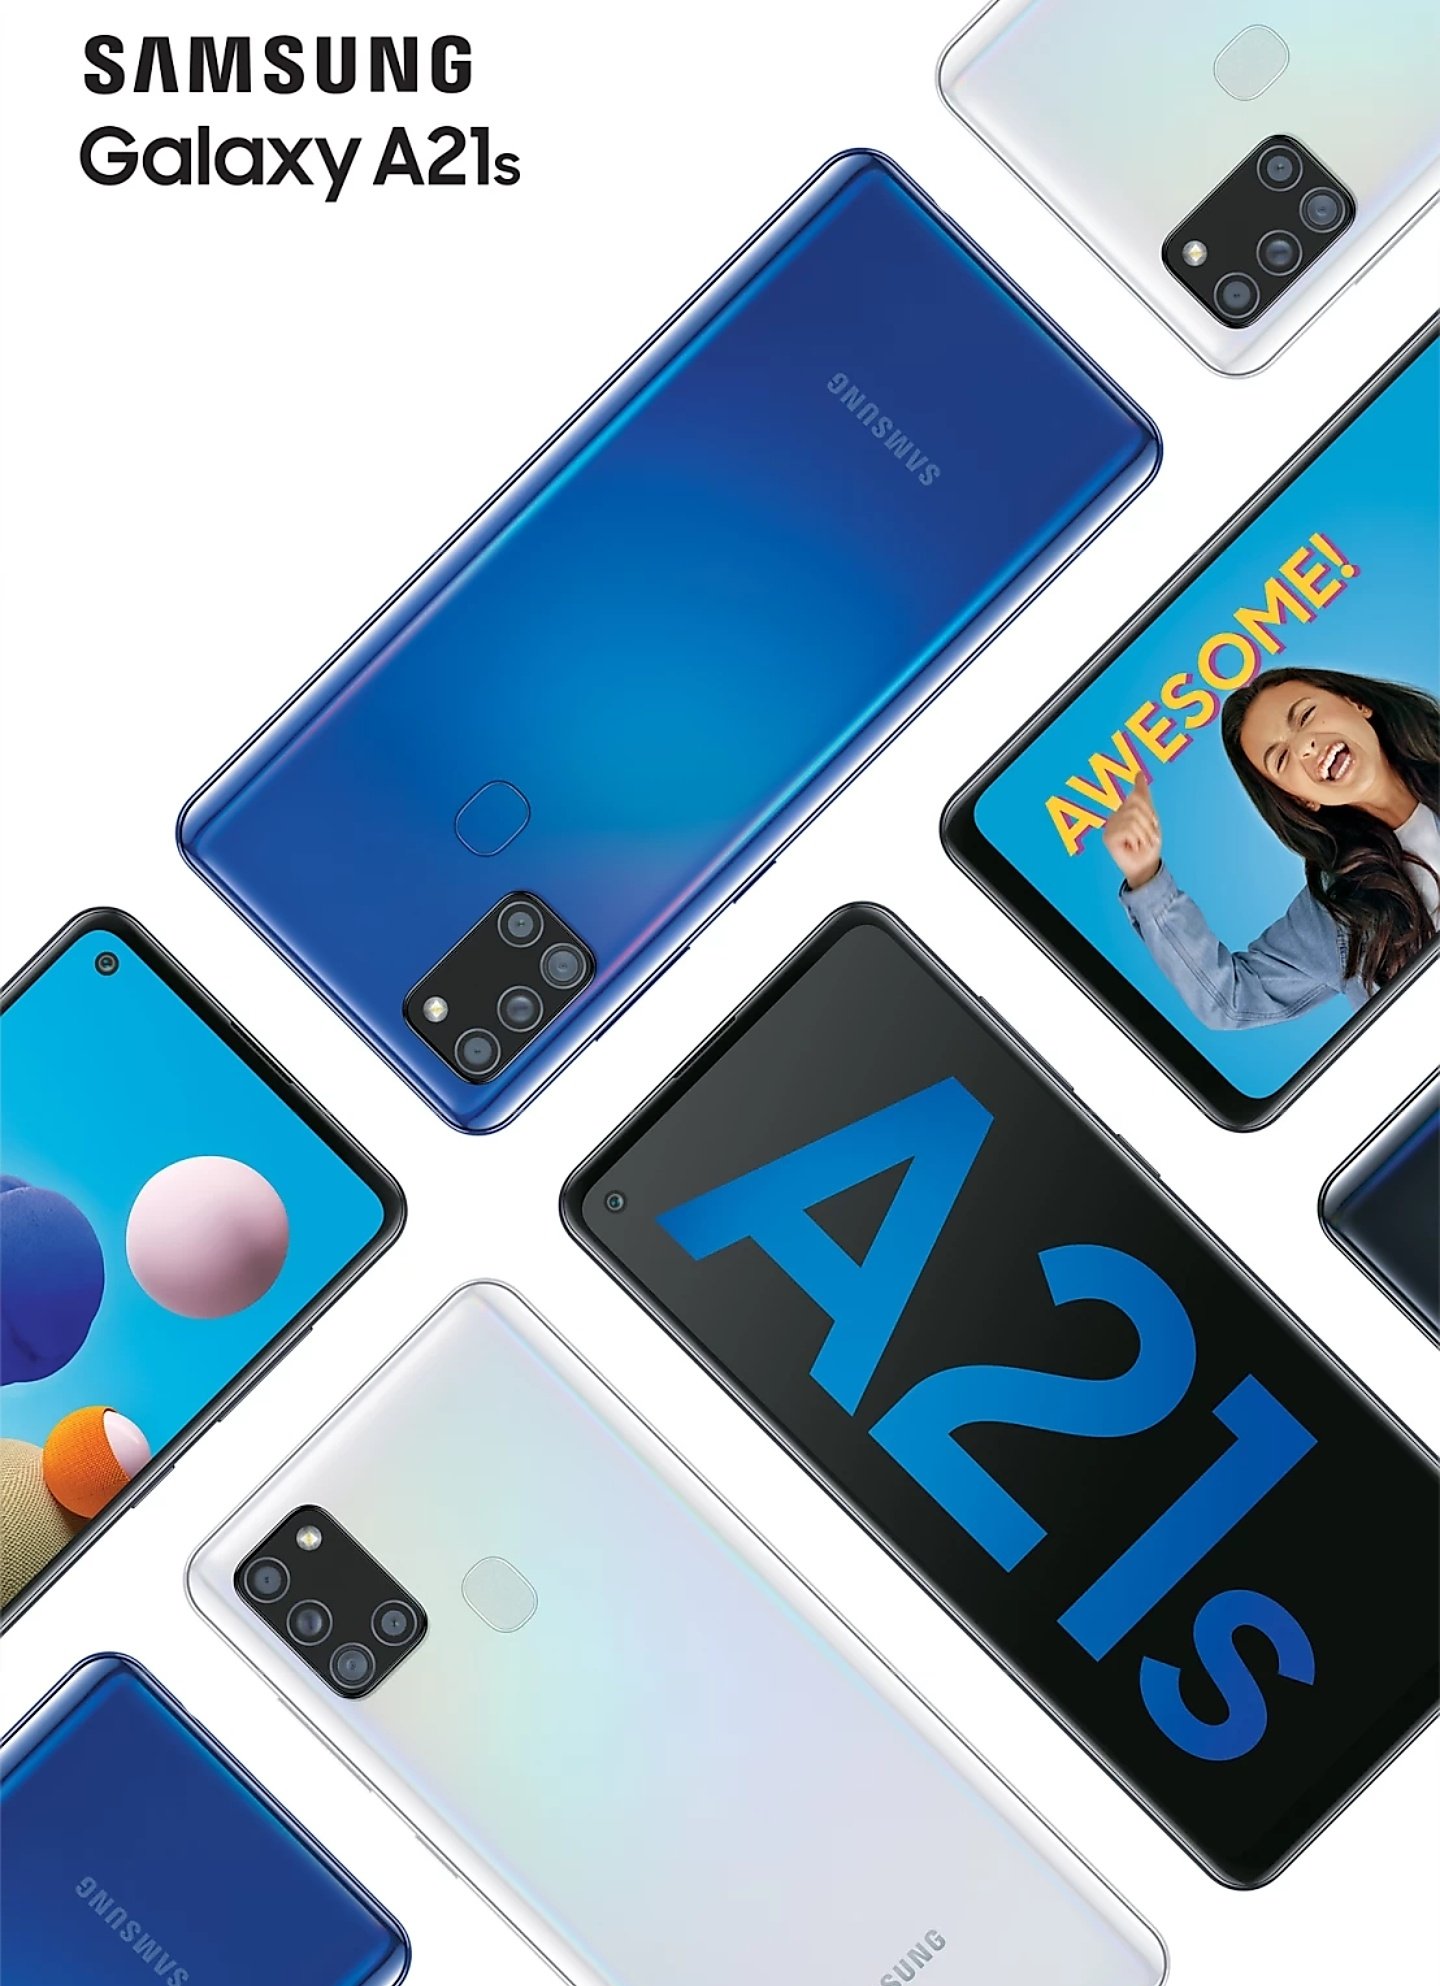 Samsung Galaxy A51 5G and Galaxy A21s launched in France